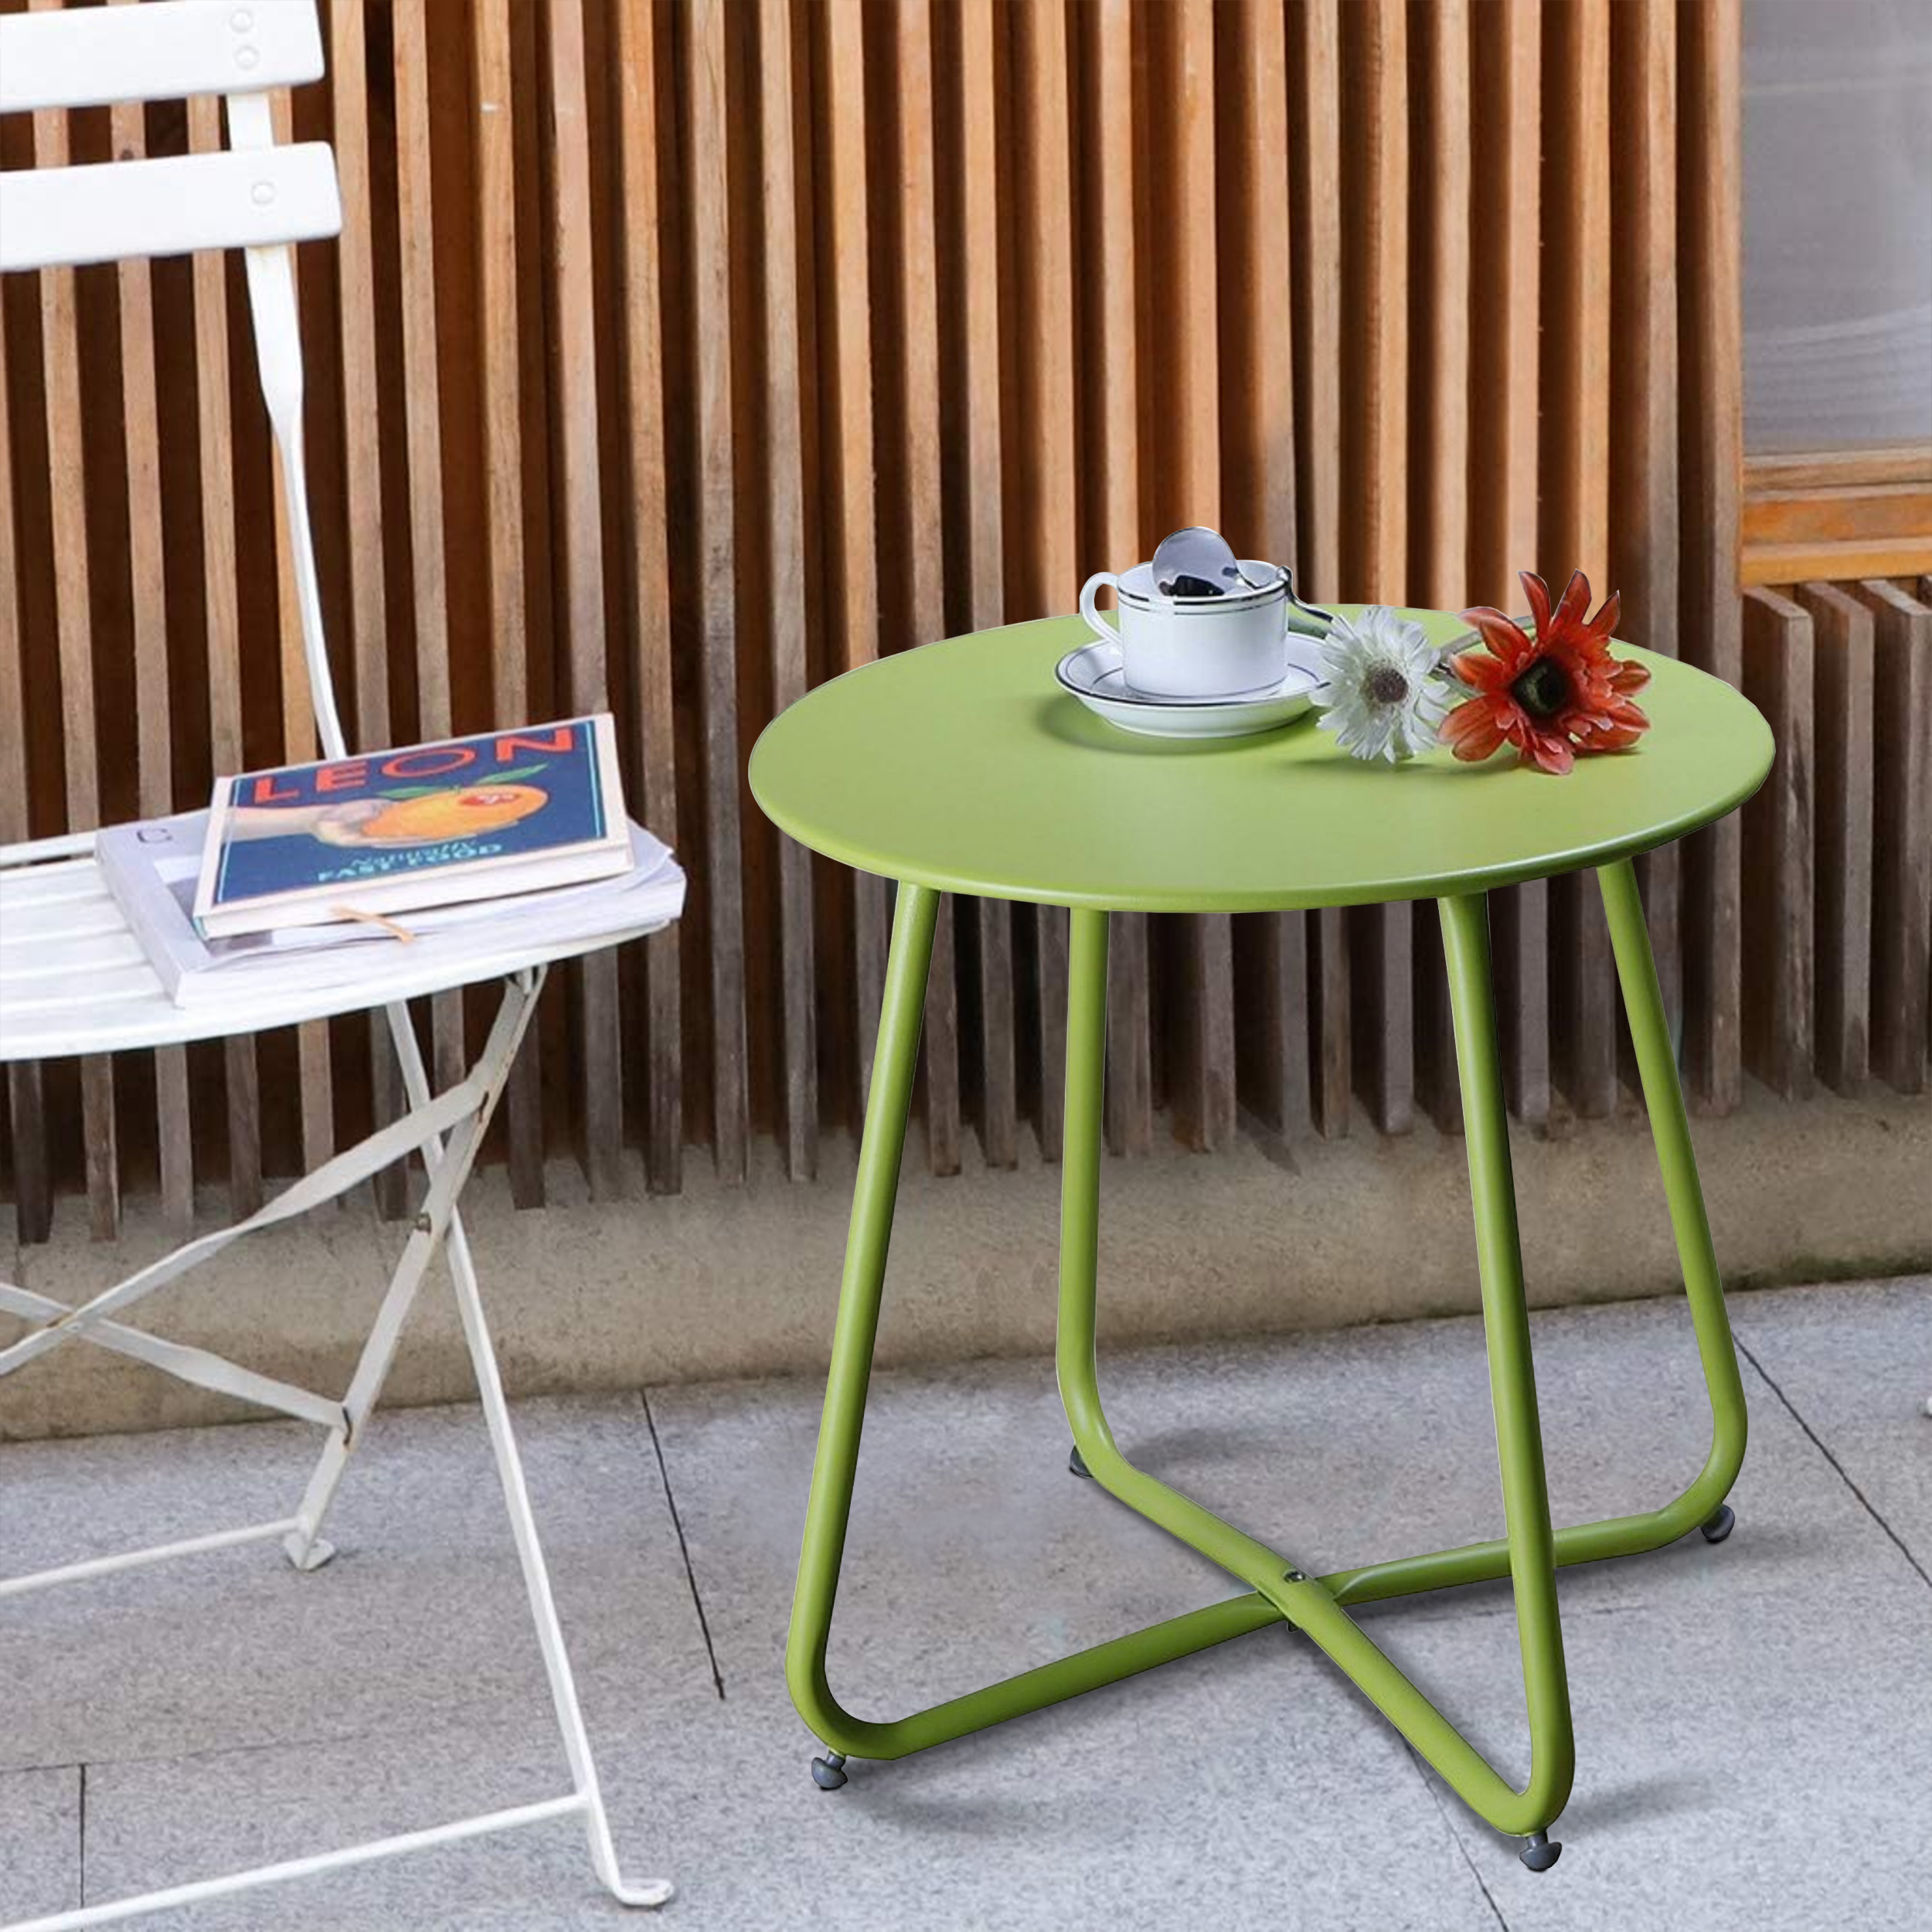 Grand Patio Steel Patio Side Table, Weather Resistant Outdoor Round End Table